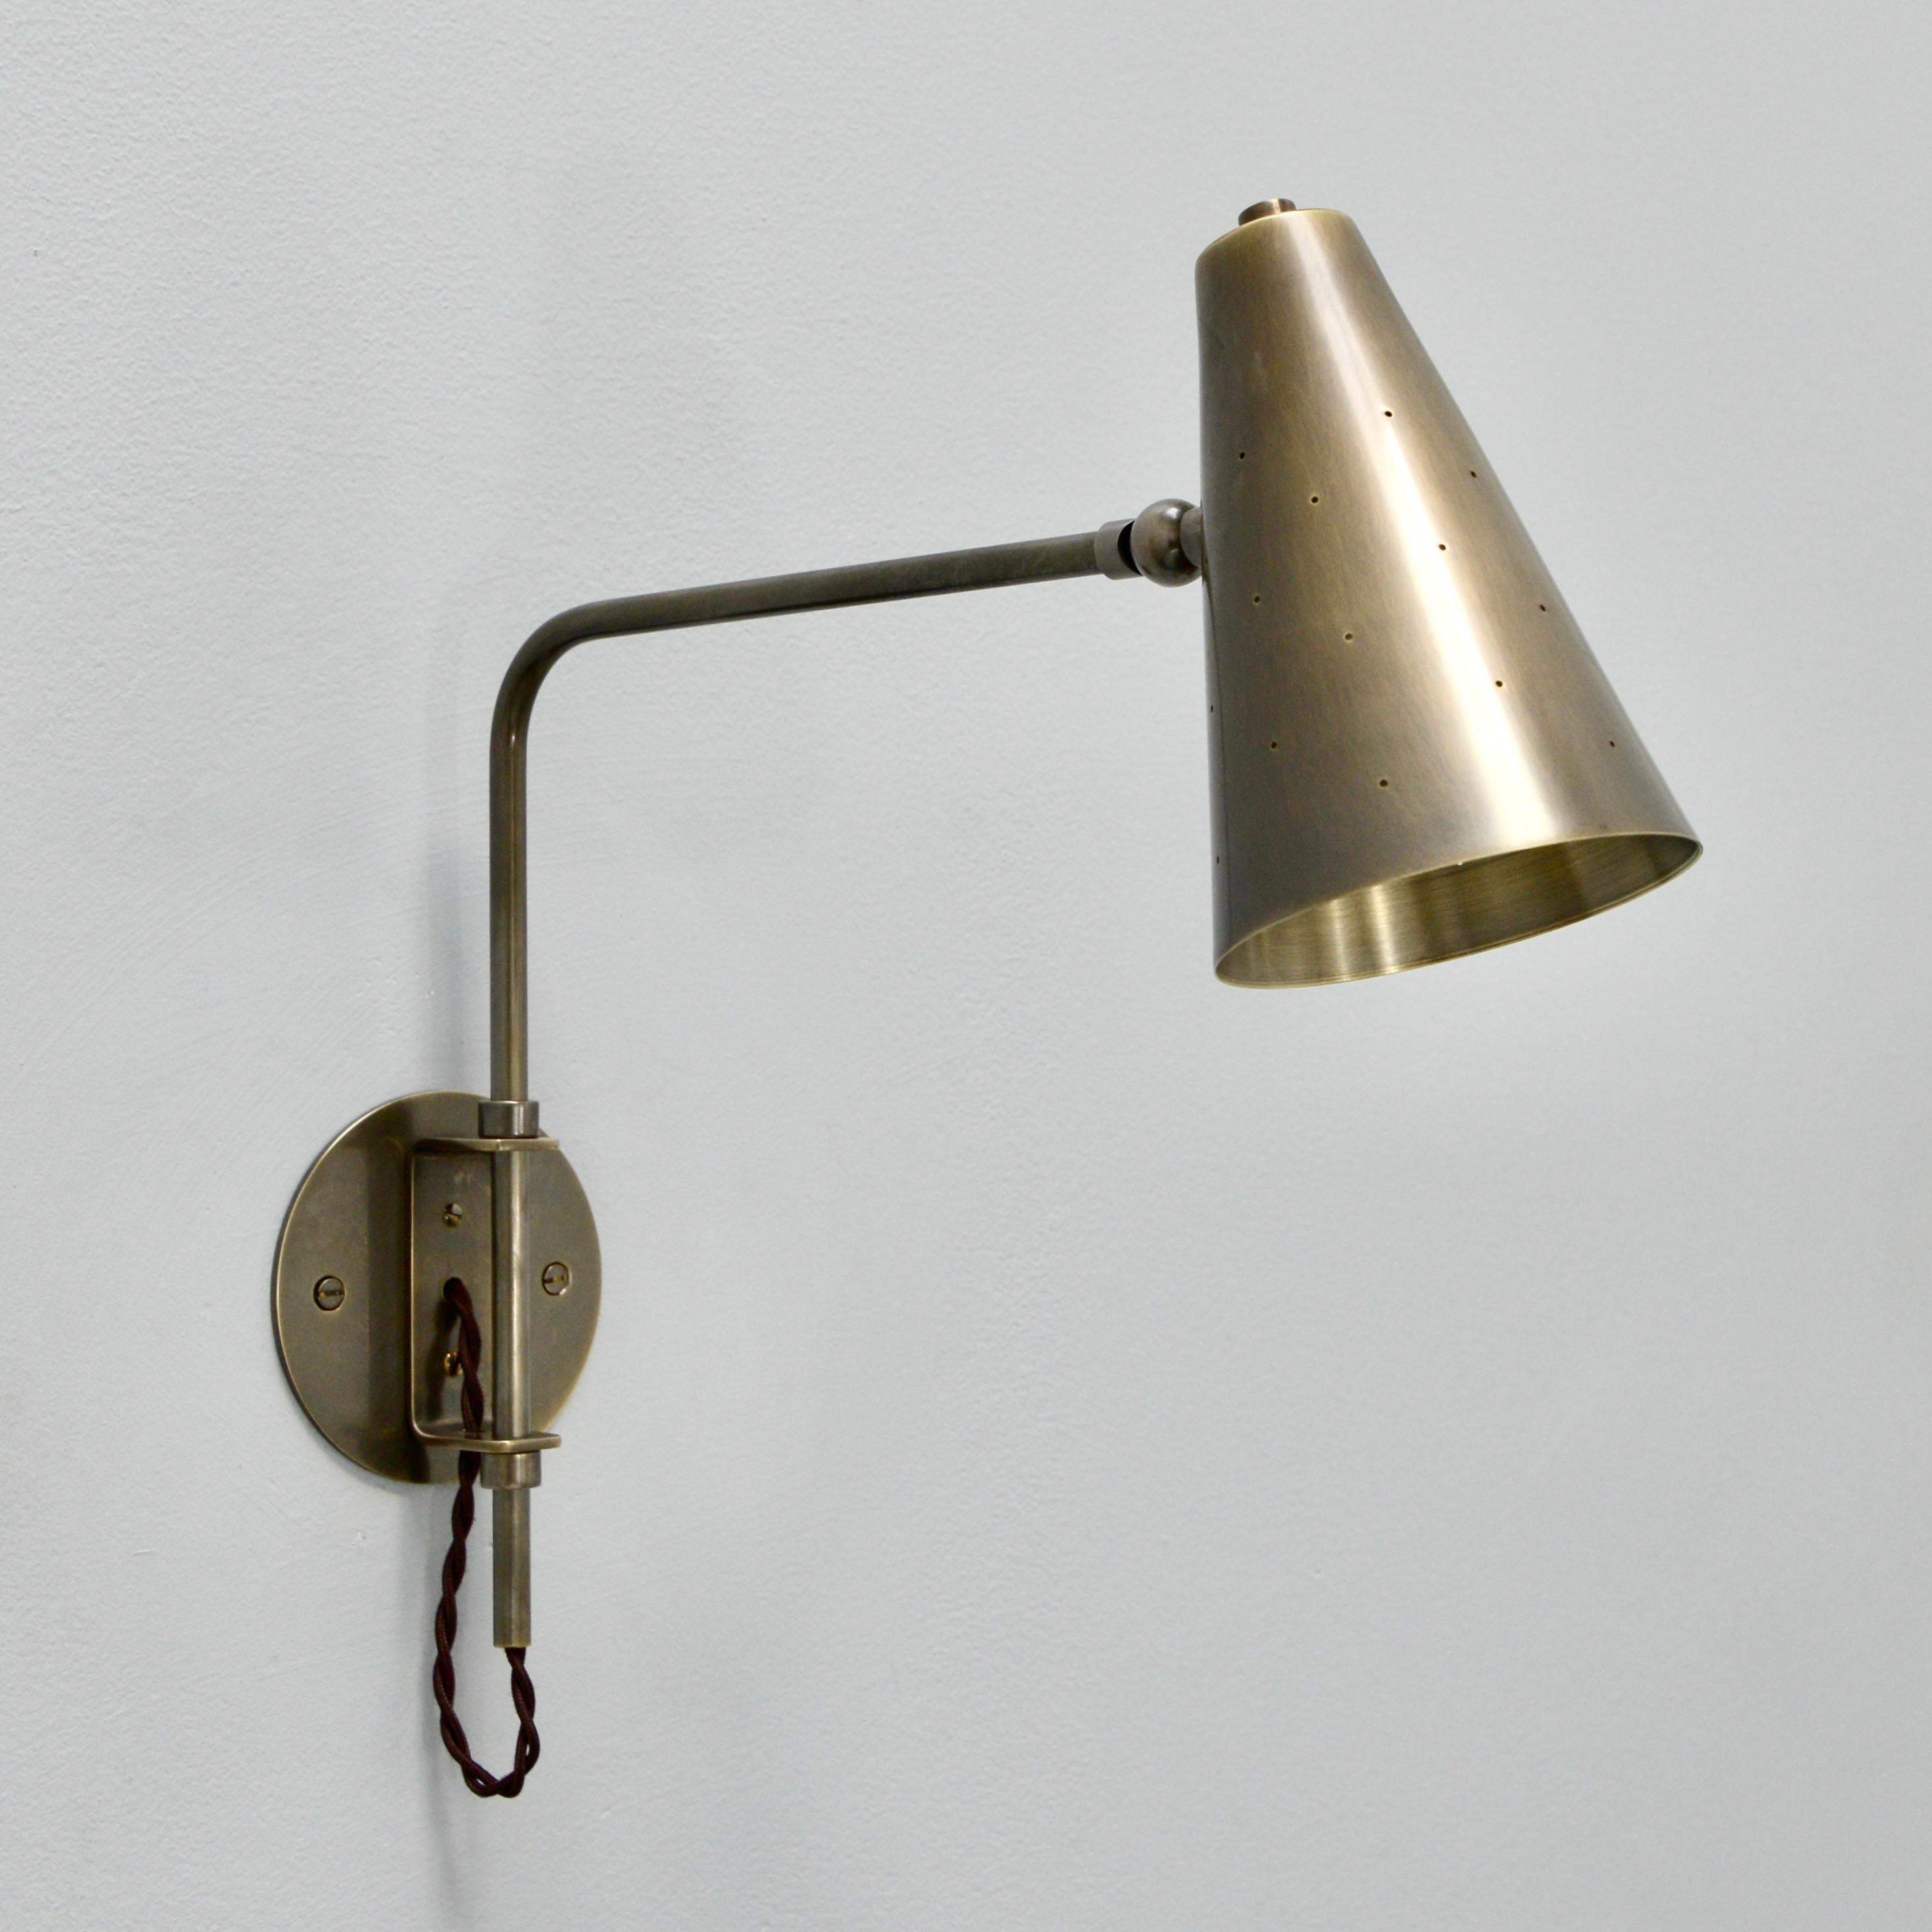 This all patinated brass LUbrary sconce is part of the Lumfardo Luminaires contemporary collection. The sconce can be customized with different dimensions and ordered for hard wired or as plug ins, with a switch either at the cord or at the shade.